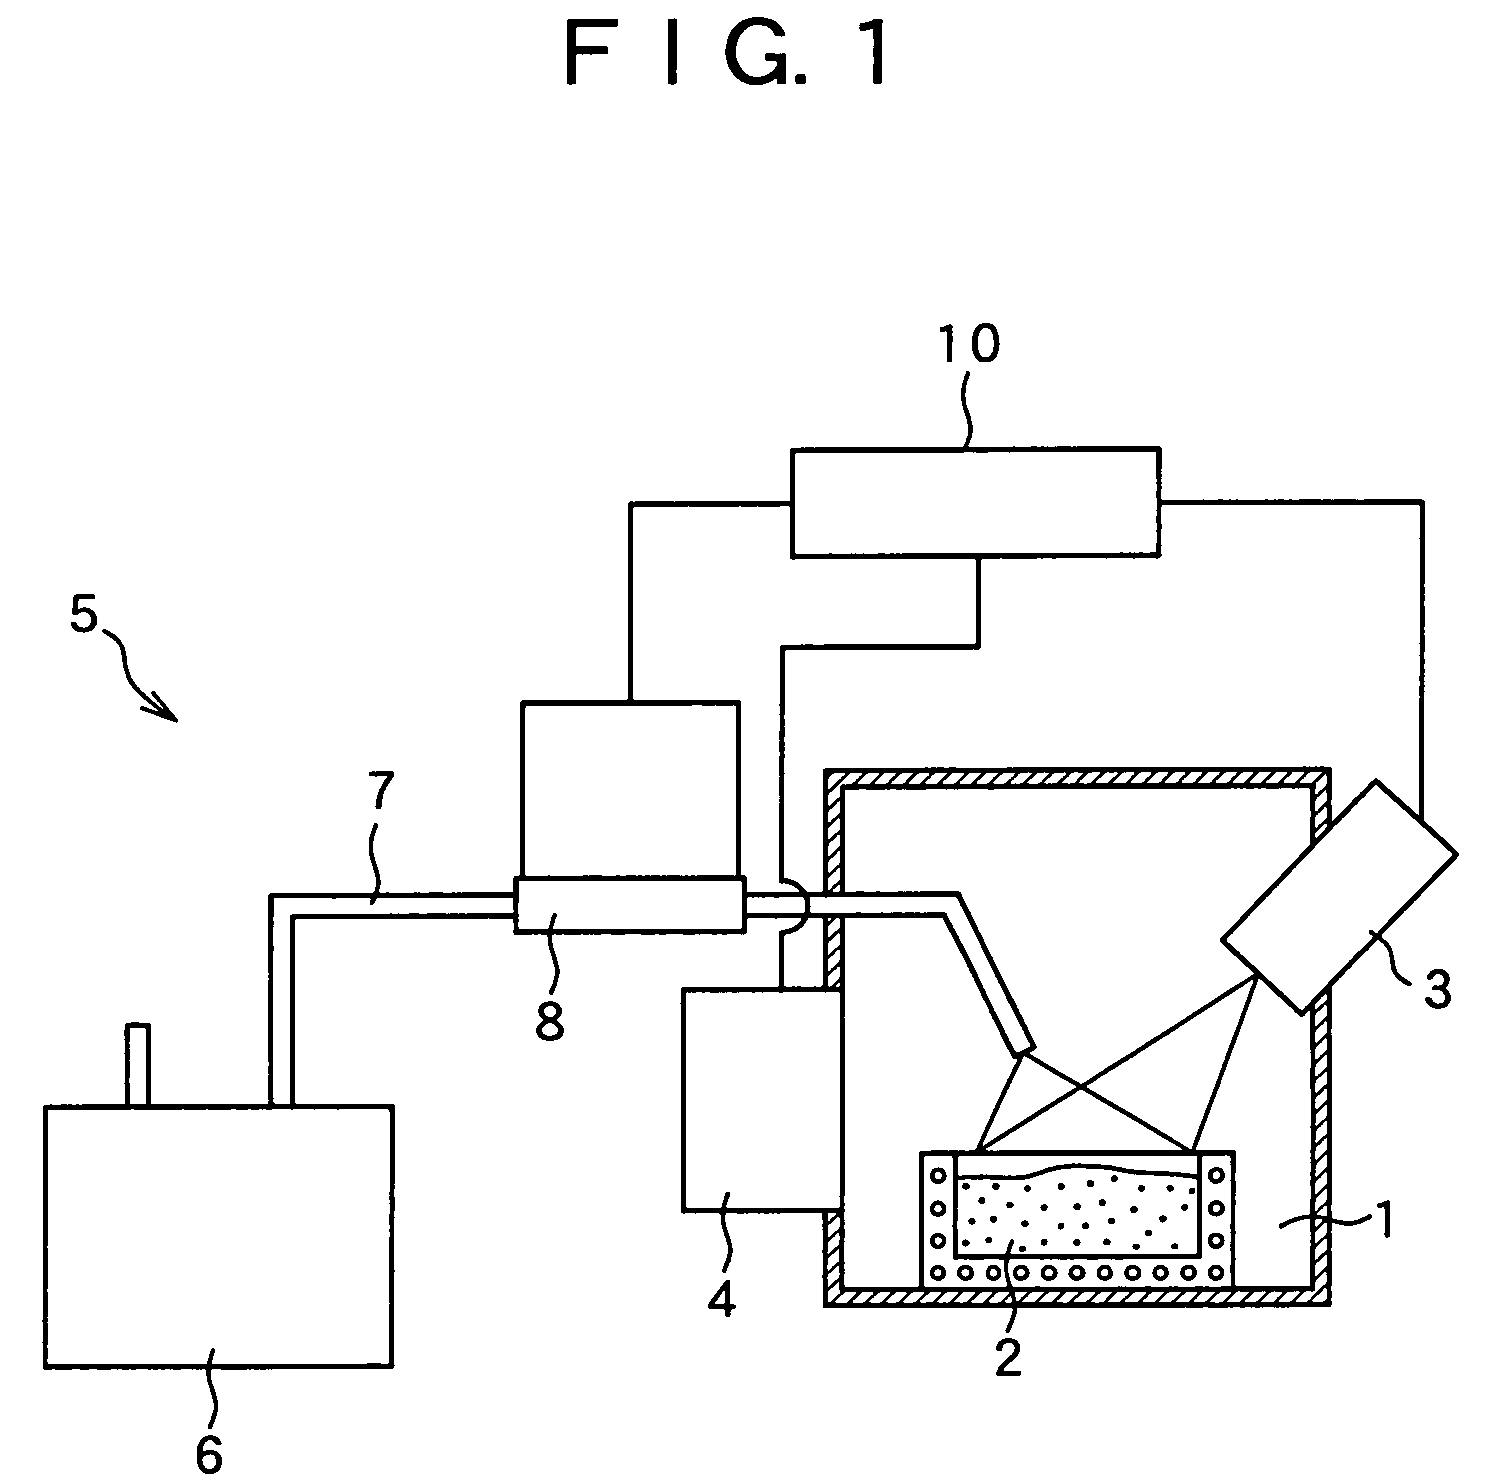 Method and apparatus for refining silicon using an electron beam